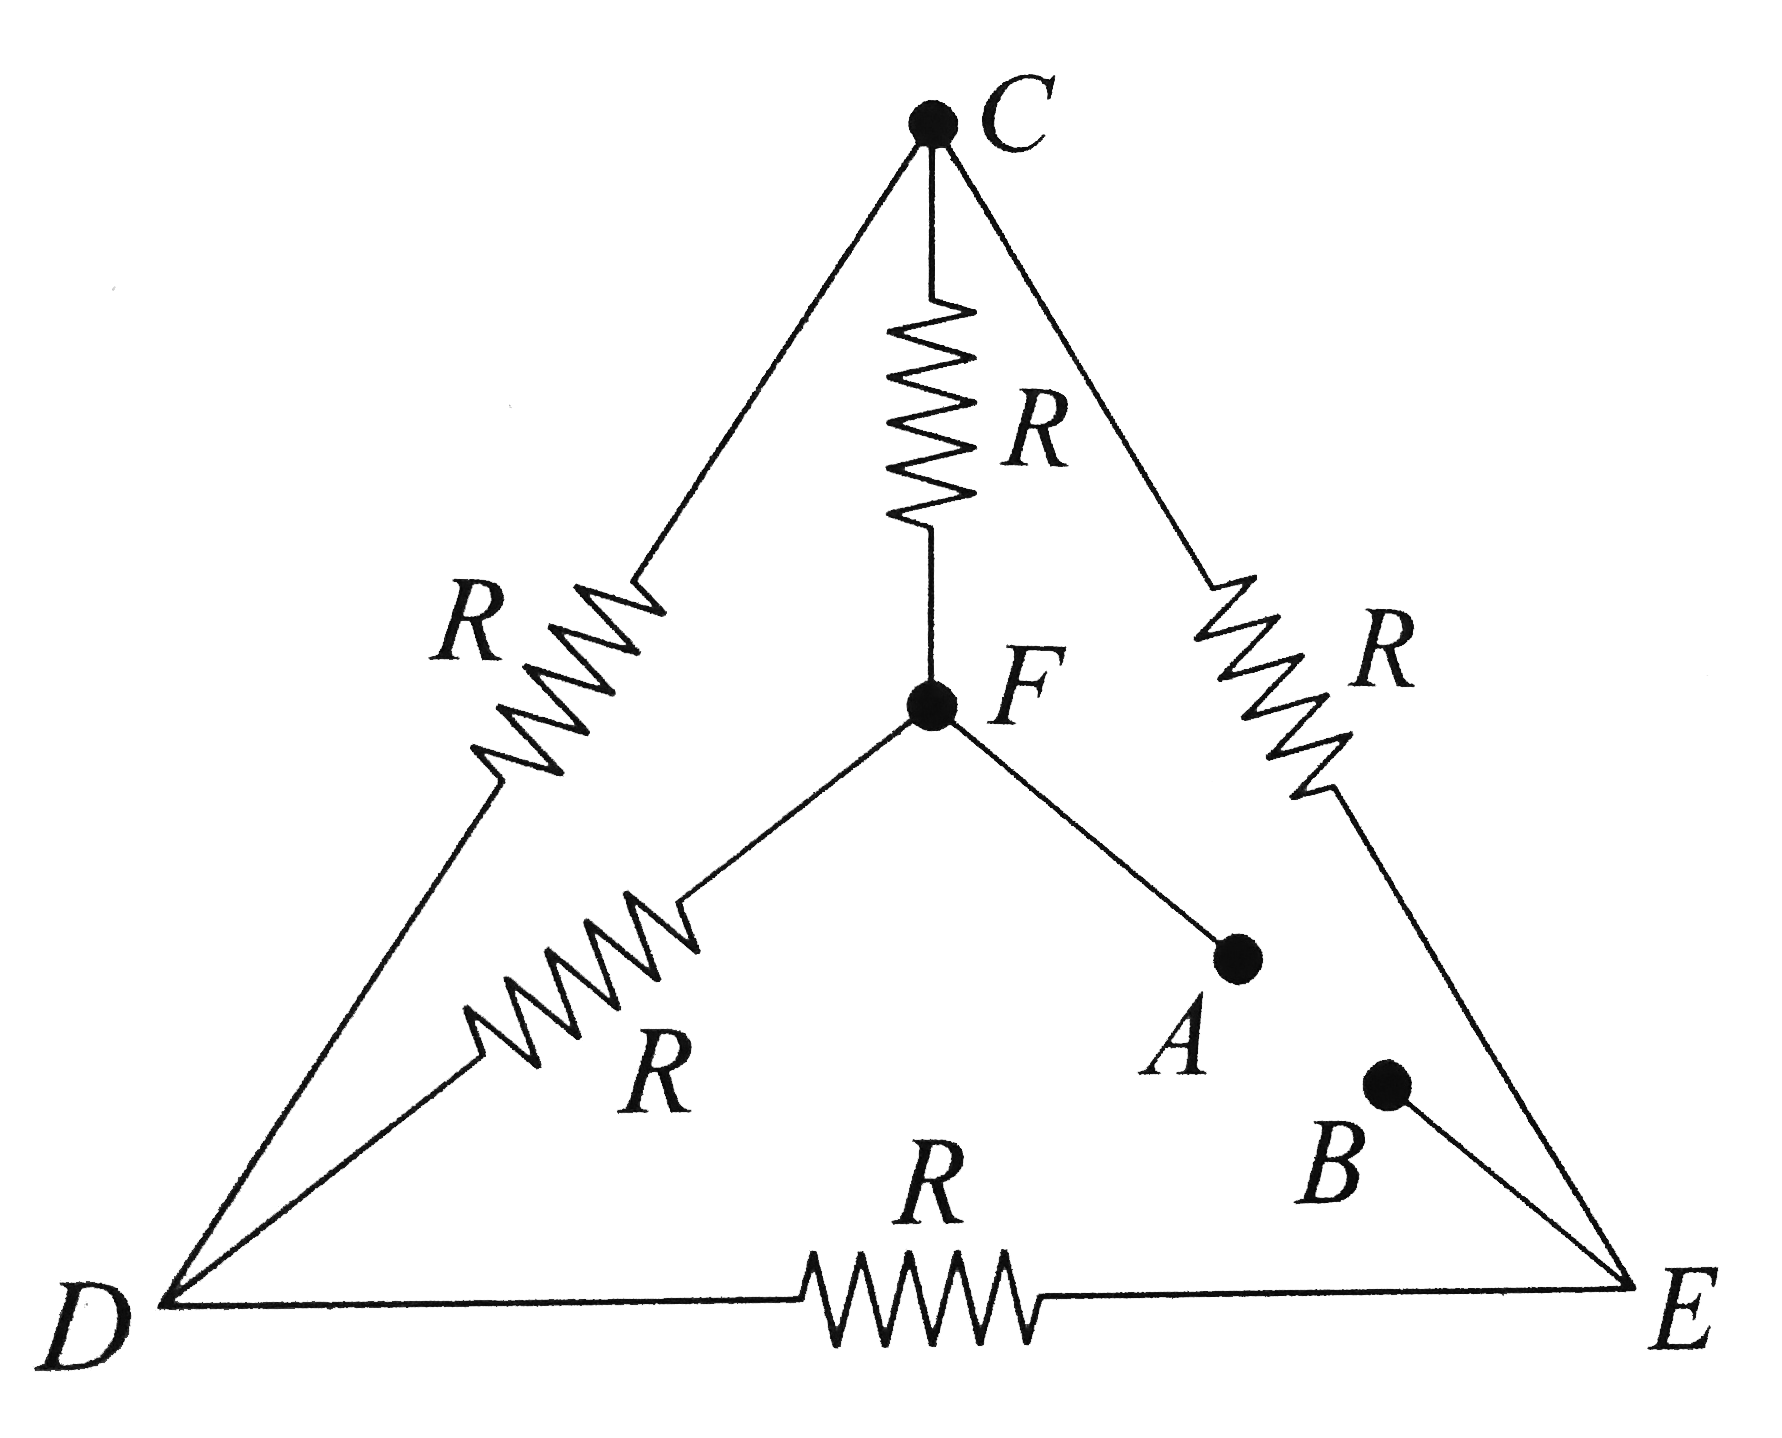 Five equal resistances each of resistance R are connected as shown in the figure. A battery of V volts is connected between A and B. The current flowing in AFCEB will be